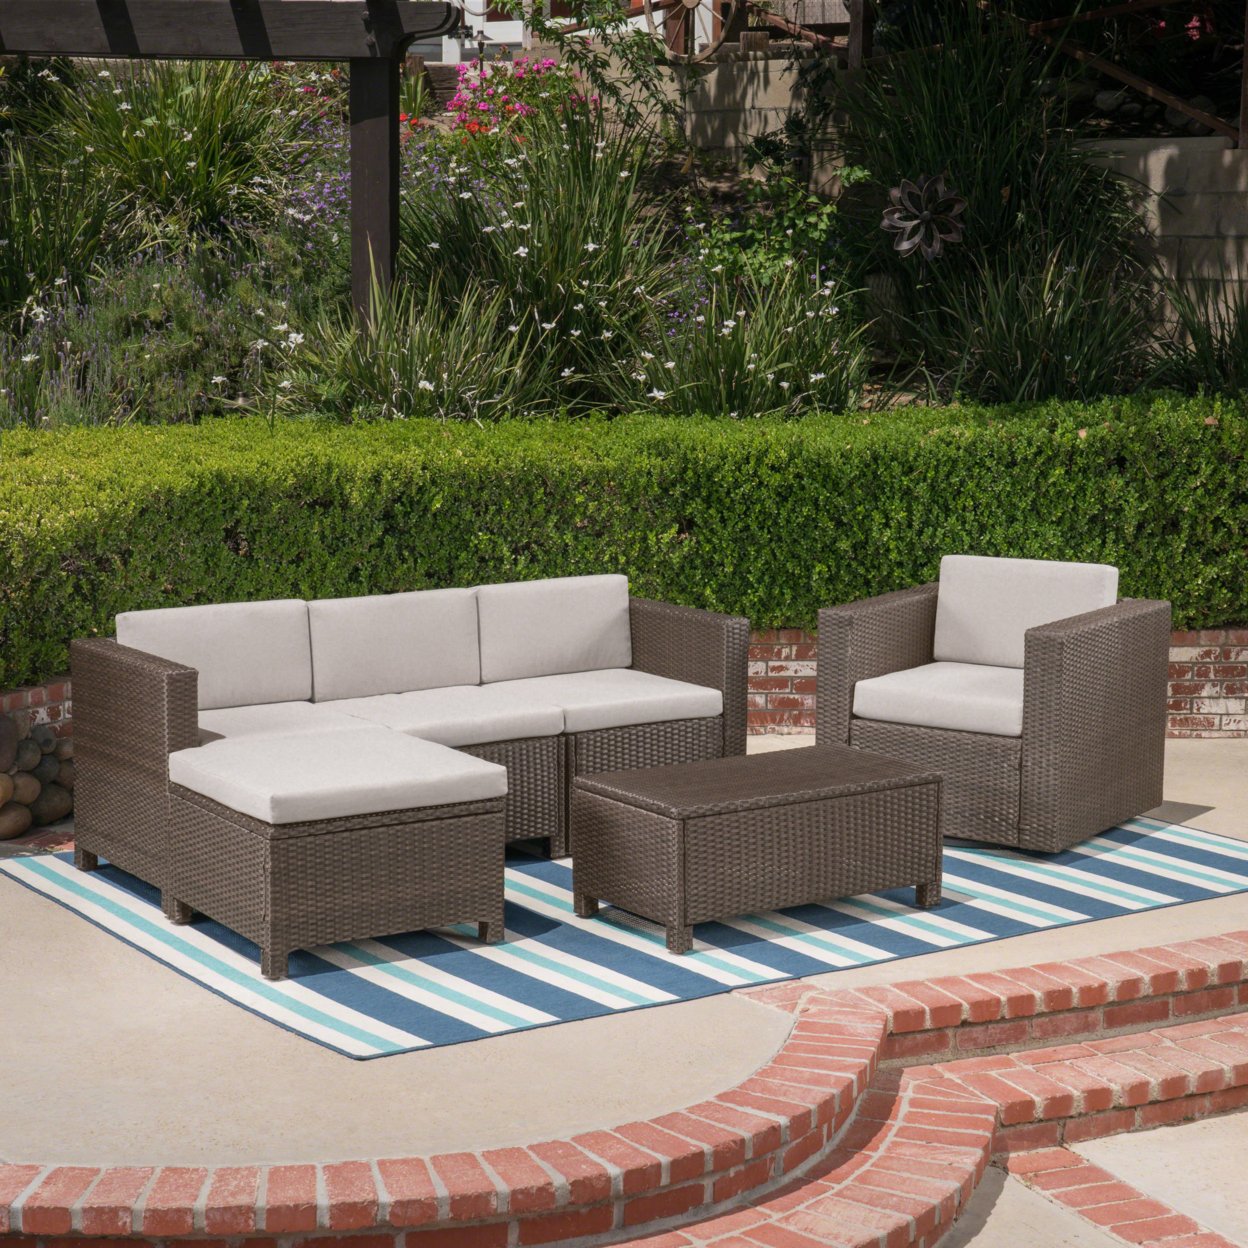 Tanner Outdoor 4 Seater Wicker L-Shaped Sectional Sofa Set With Cushions - Brown